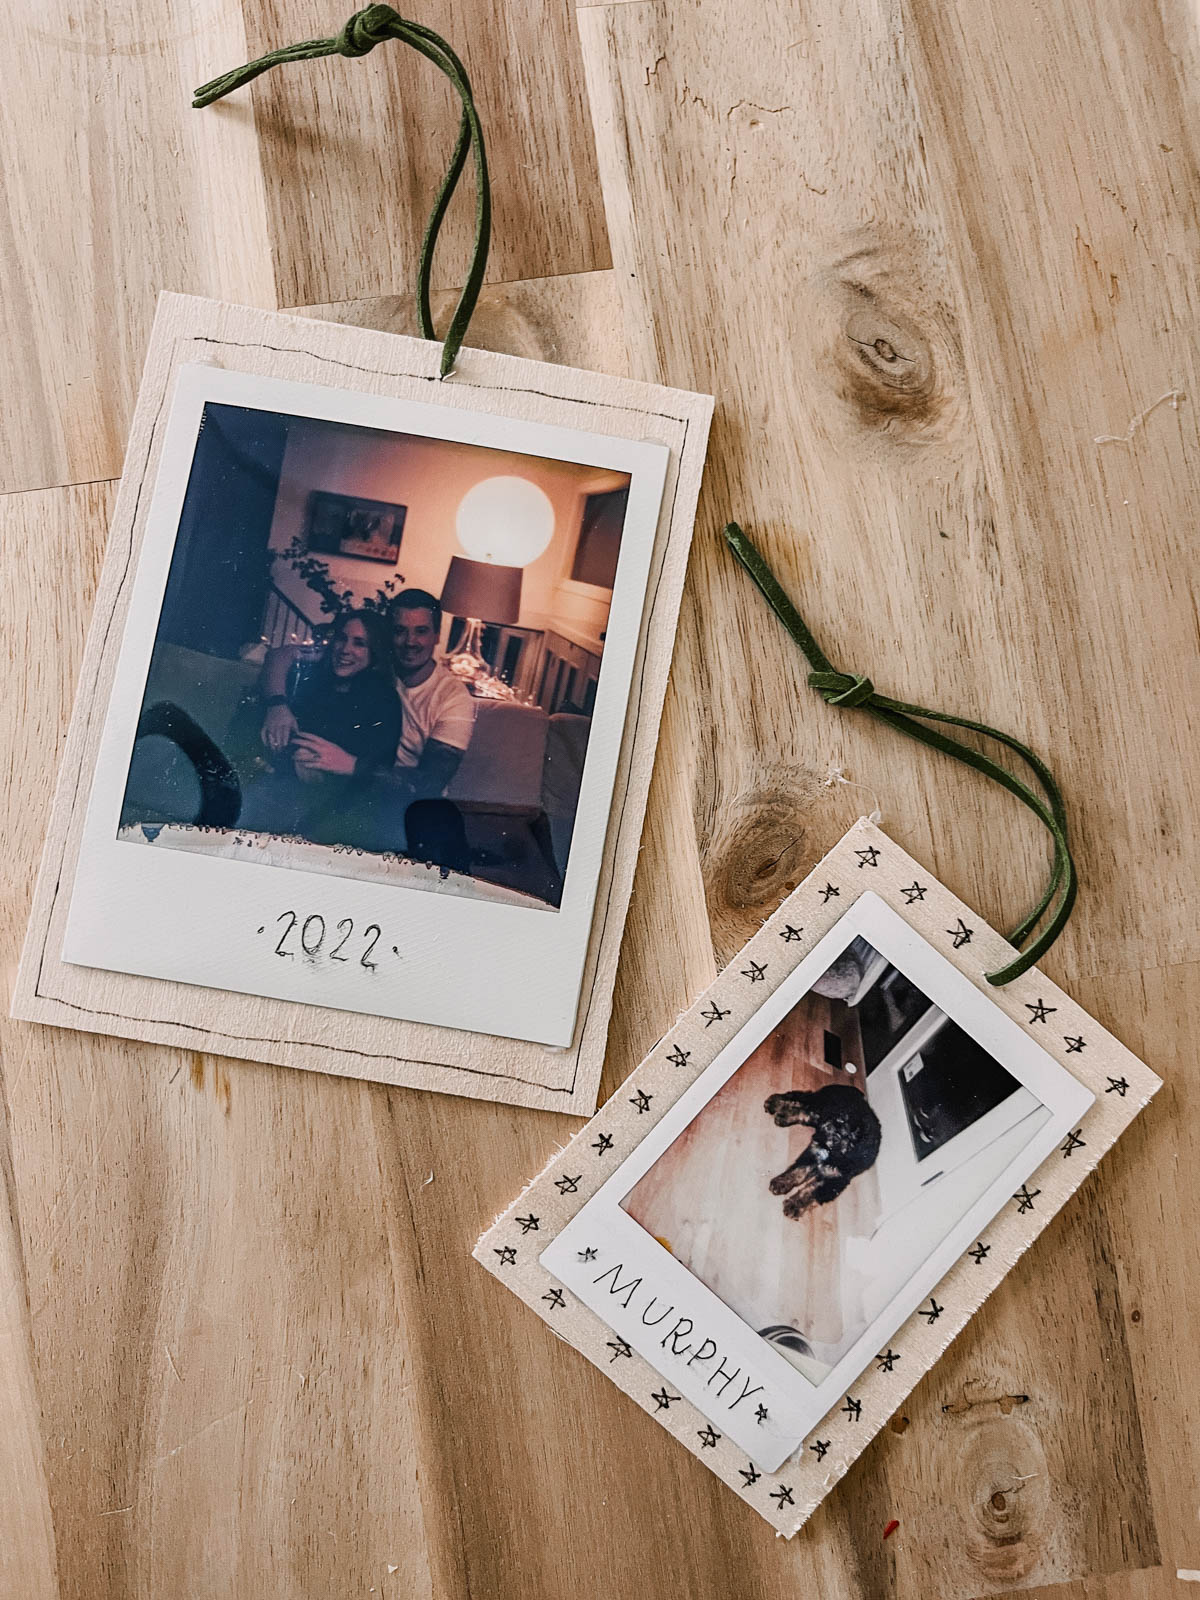 Photo ornaments using polaroids and instax